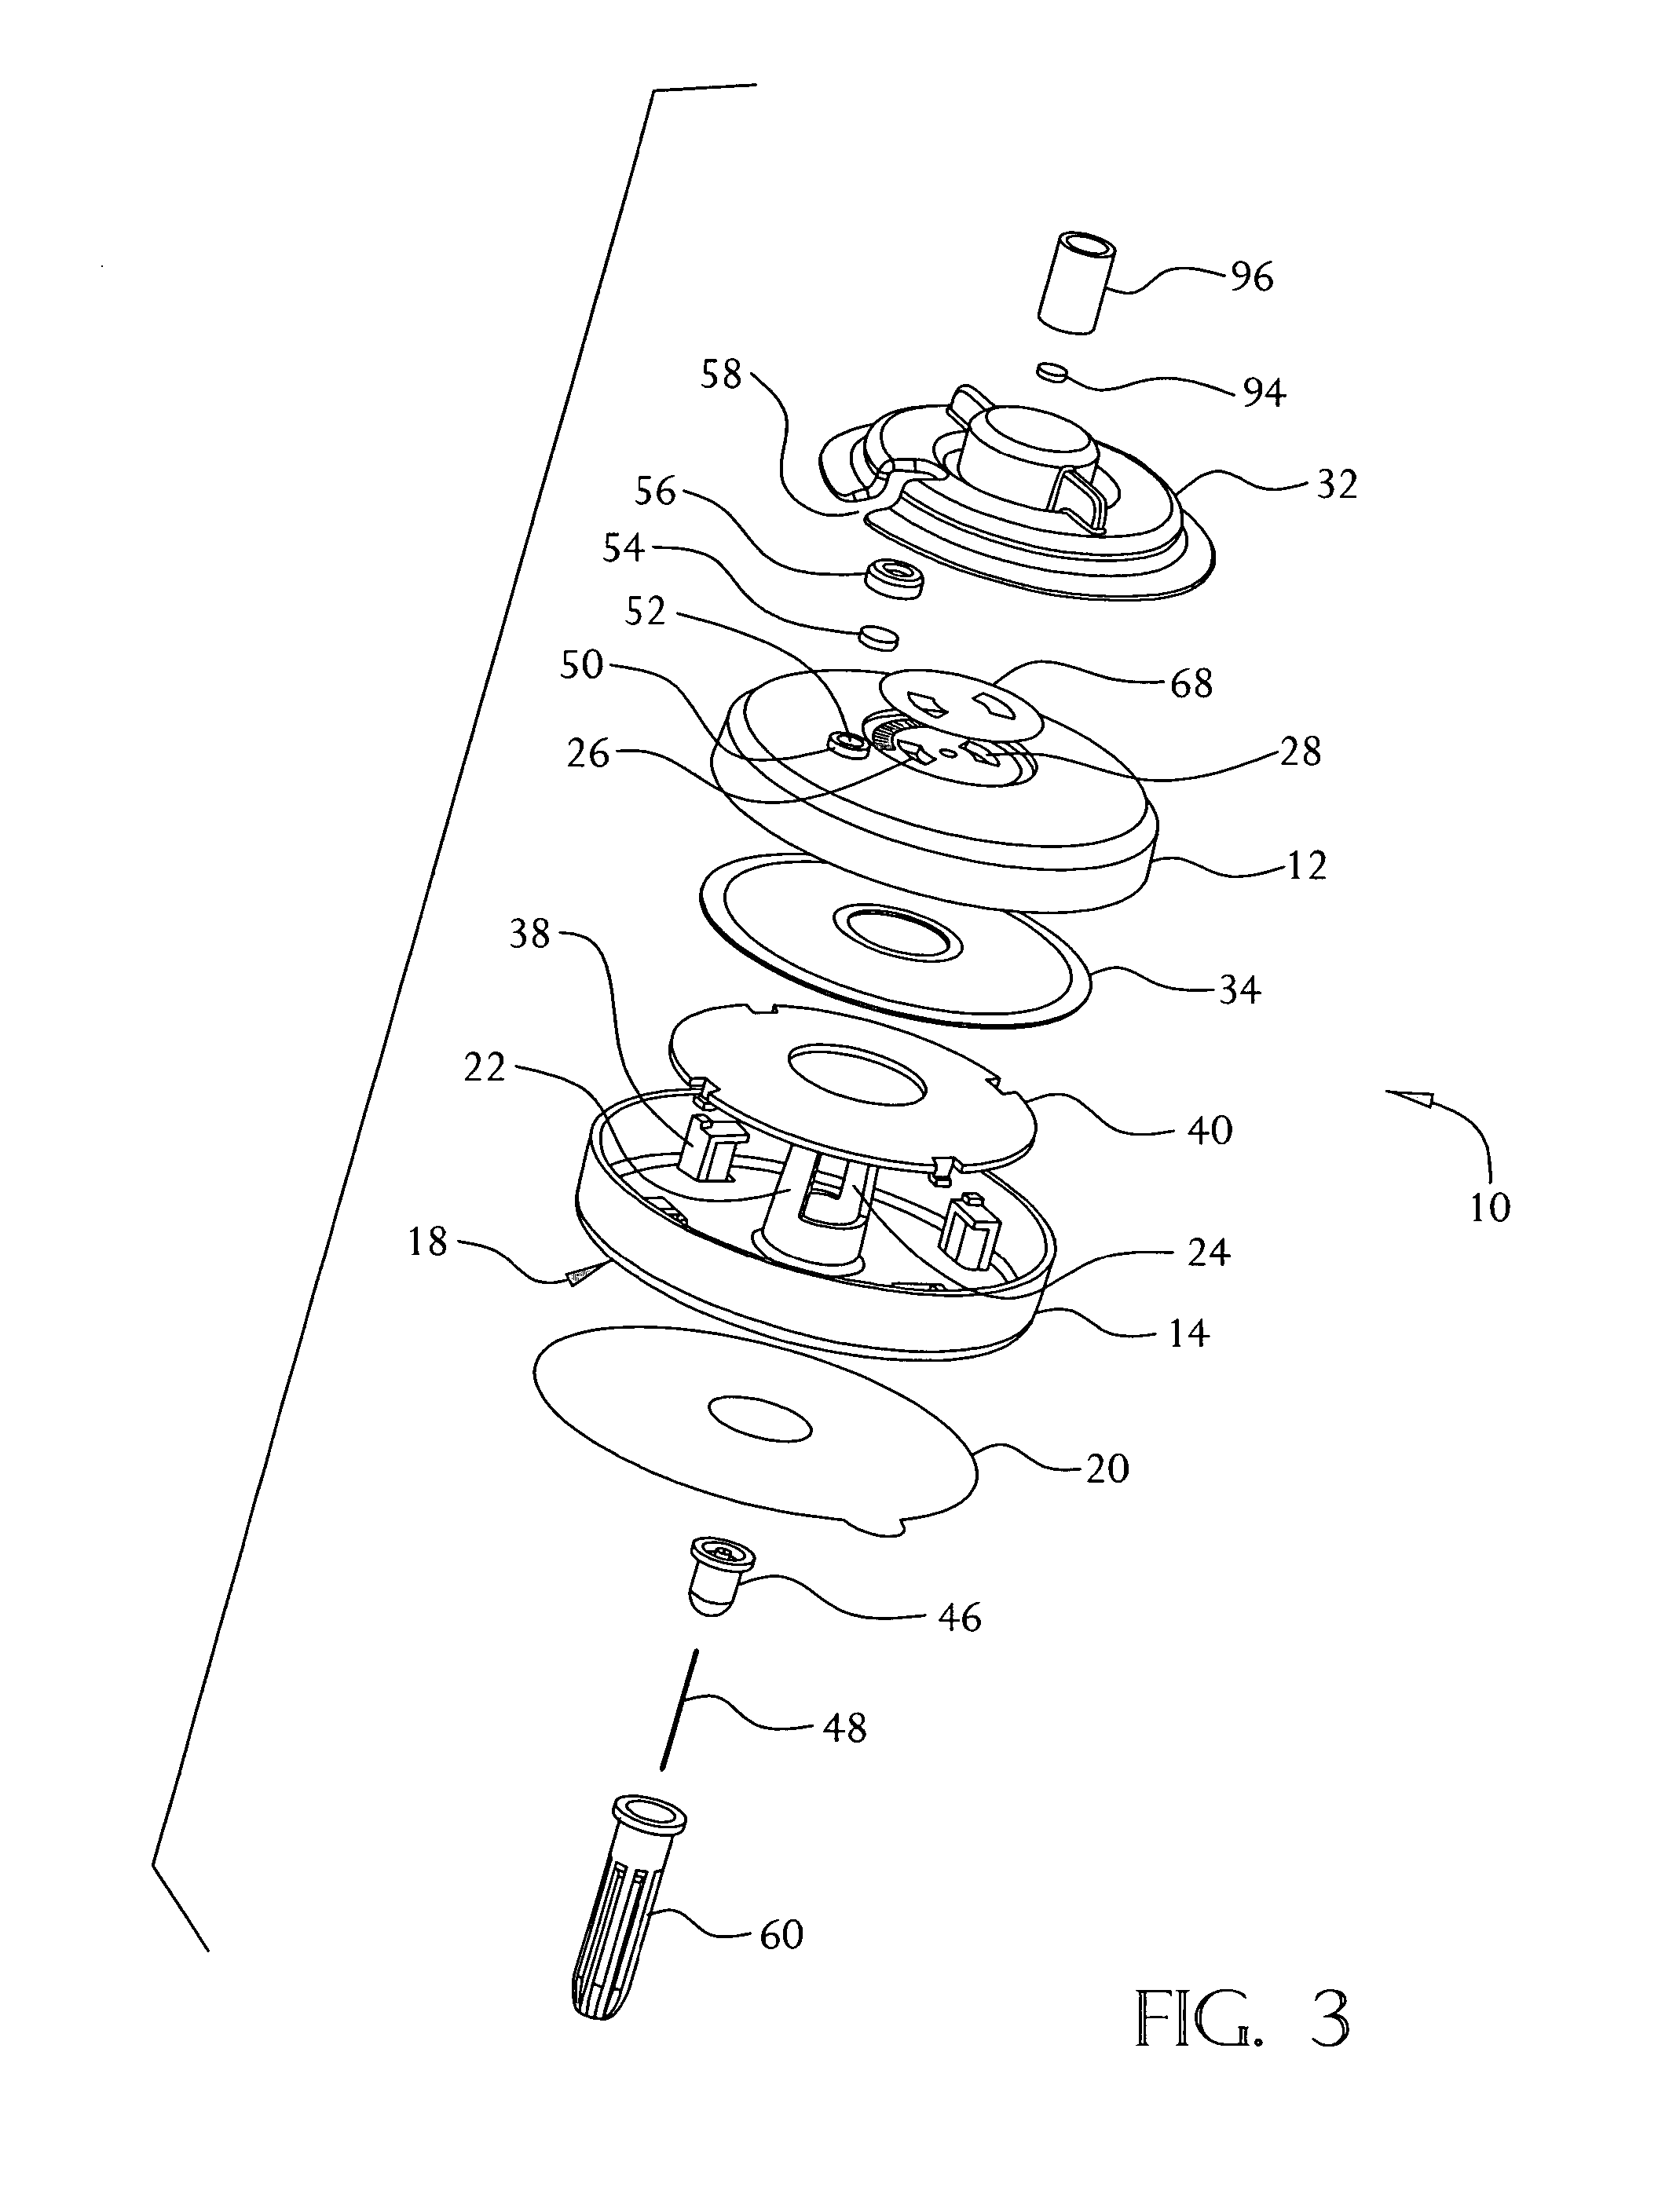 Constant rate fluid delivery device with selectable flow rate and titratable bolus button